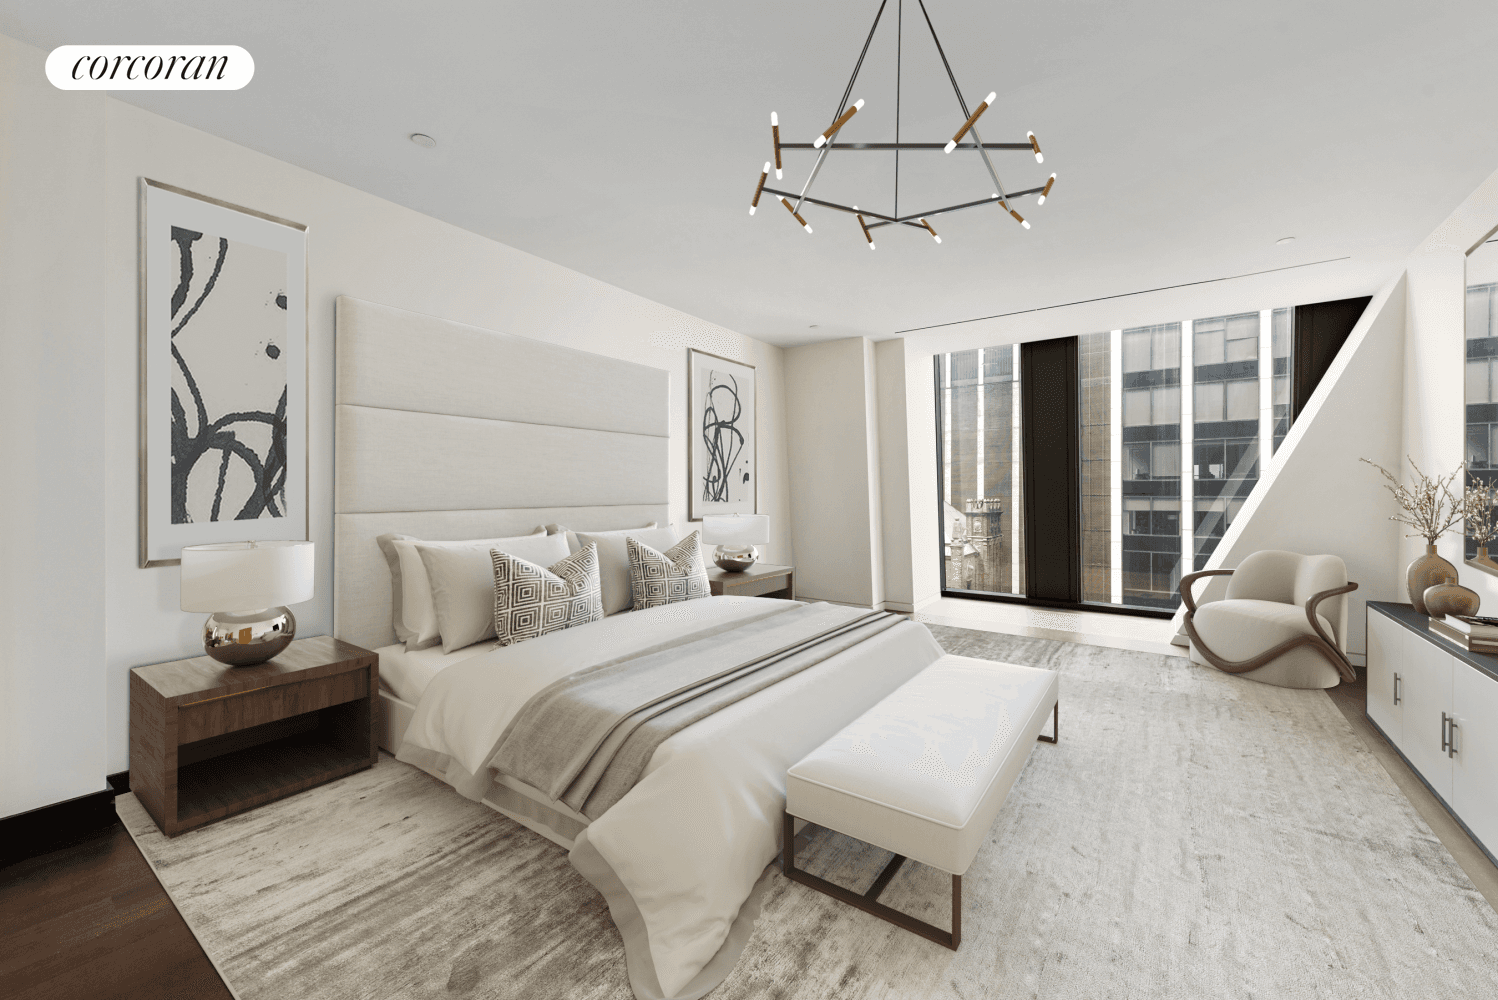 With interior design by New York based architect, designer, and artist Thierry Despont, Residence 33A is a 3, 139 square foot three bedroom, three and a half bathroom luxury condo ...